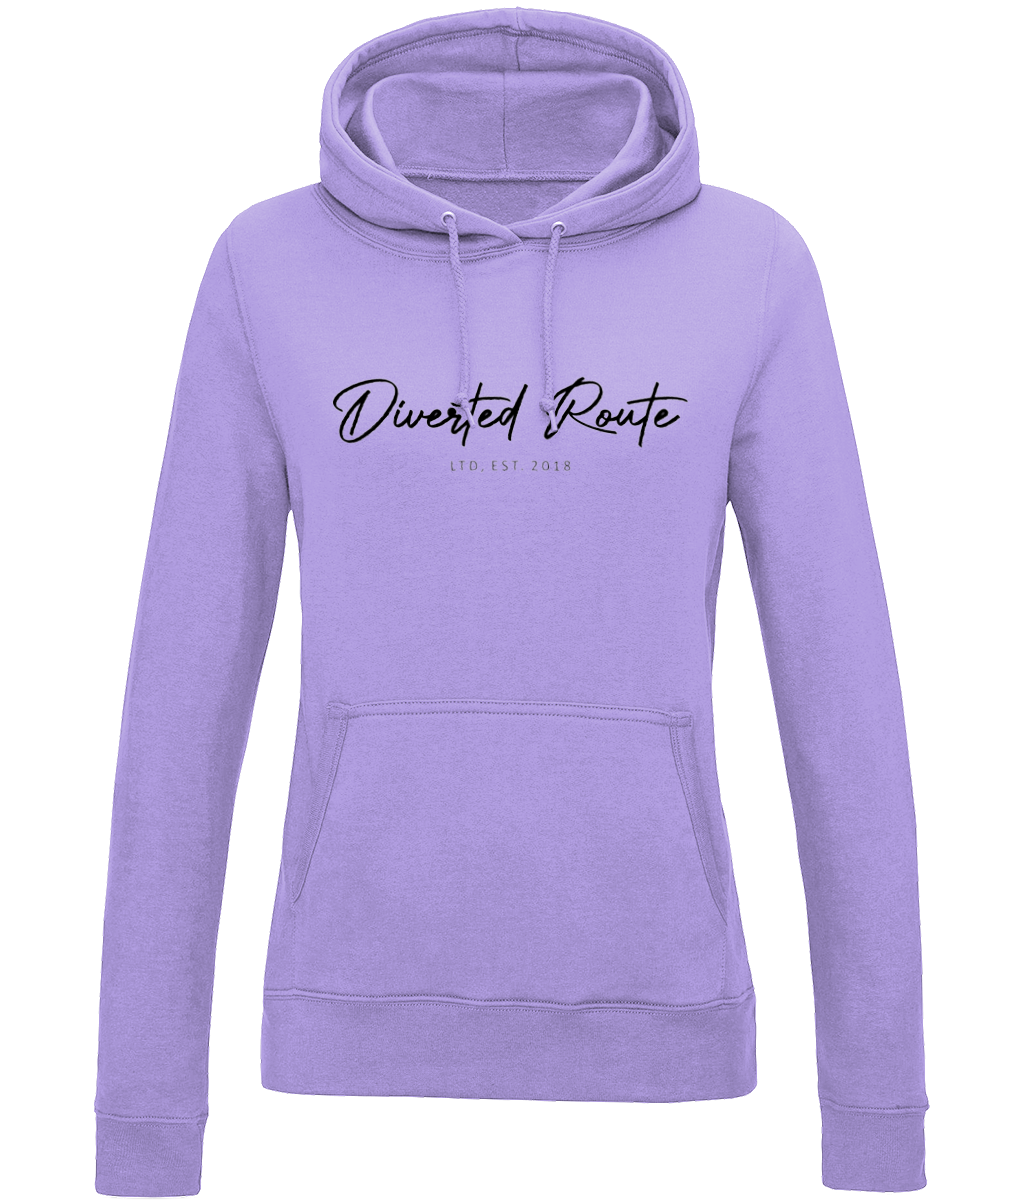 Diverted Route Ltd Womens Signature Hoody